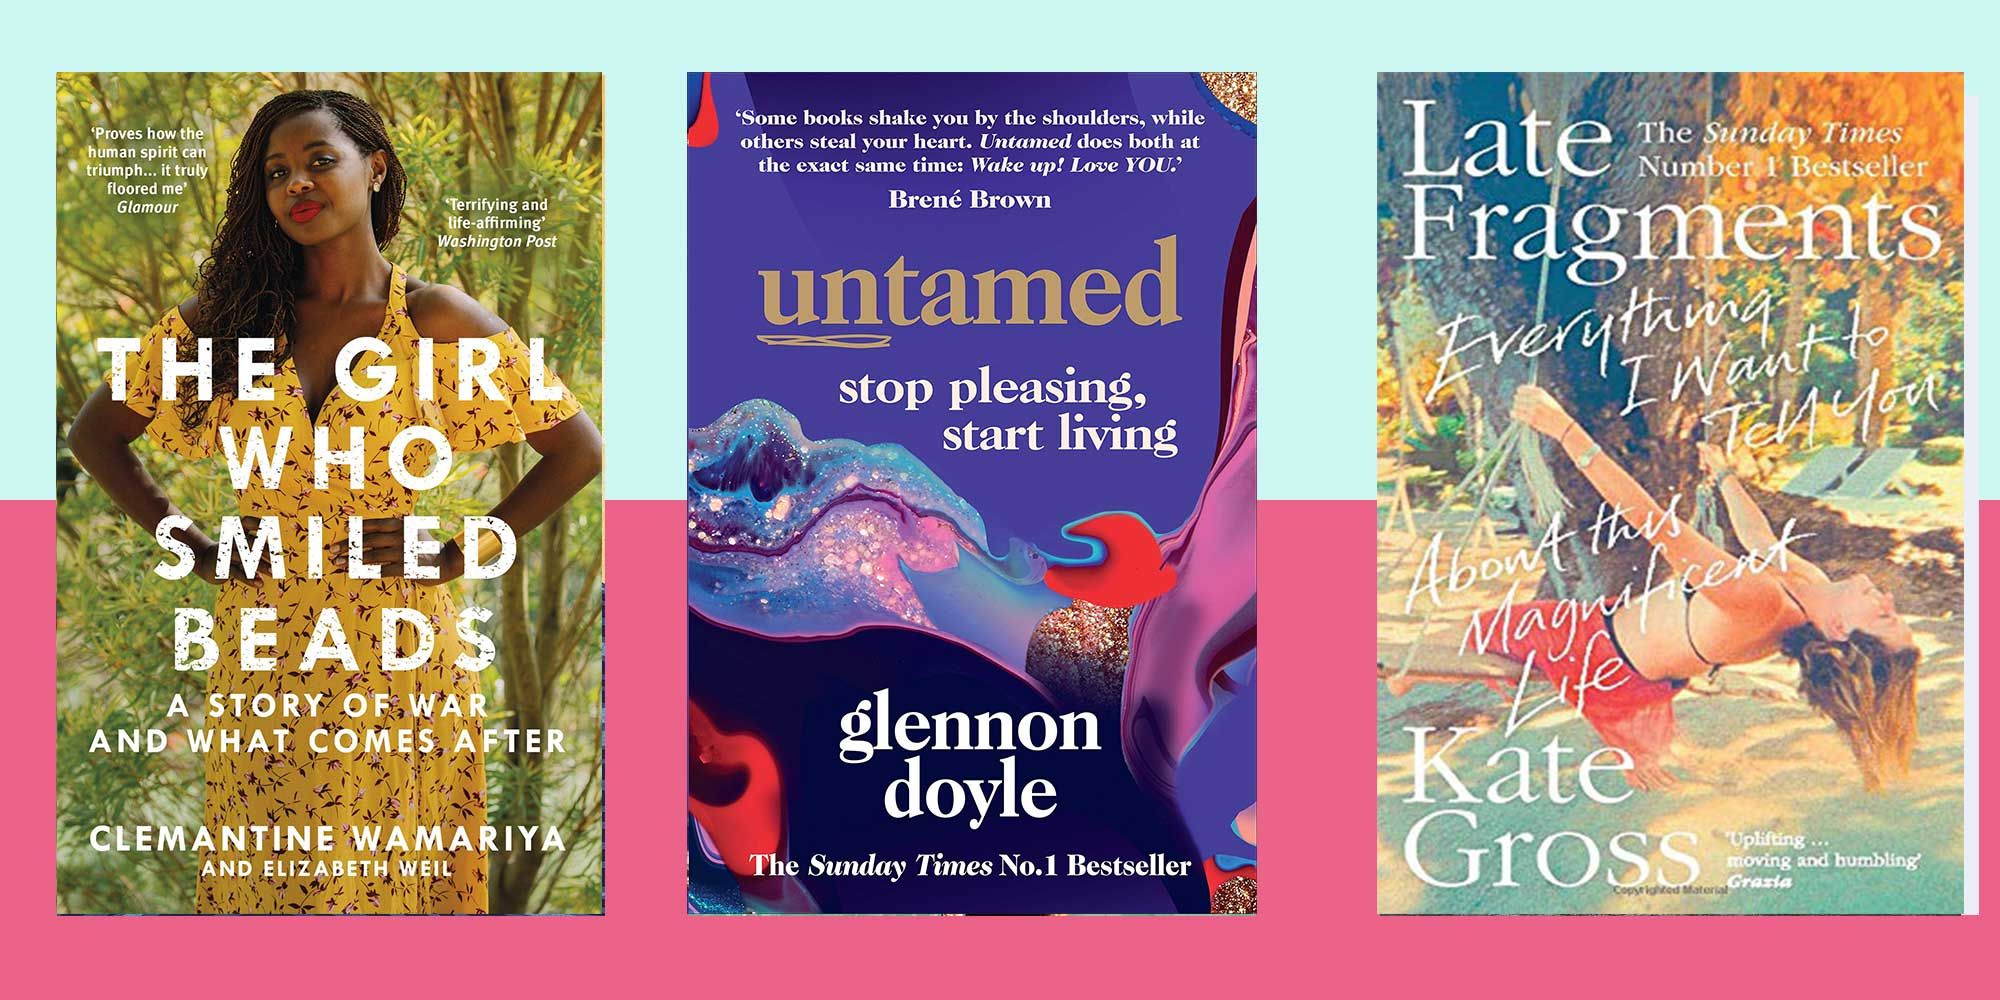 15 uplifting memoirs by remarkable women